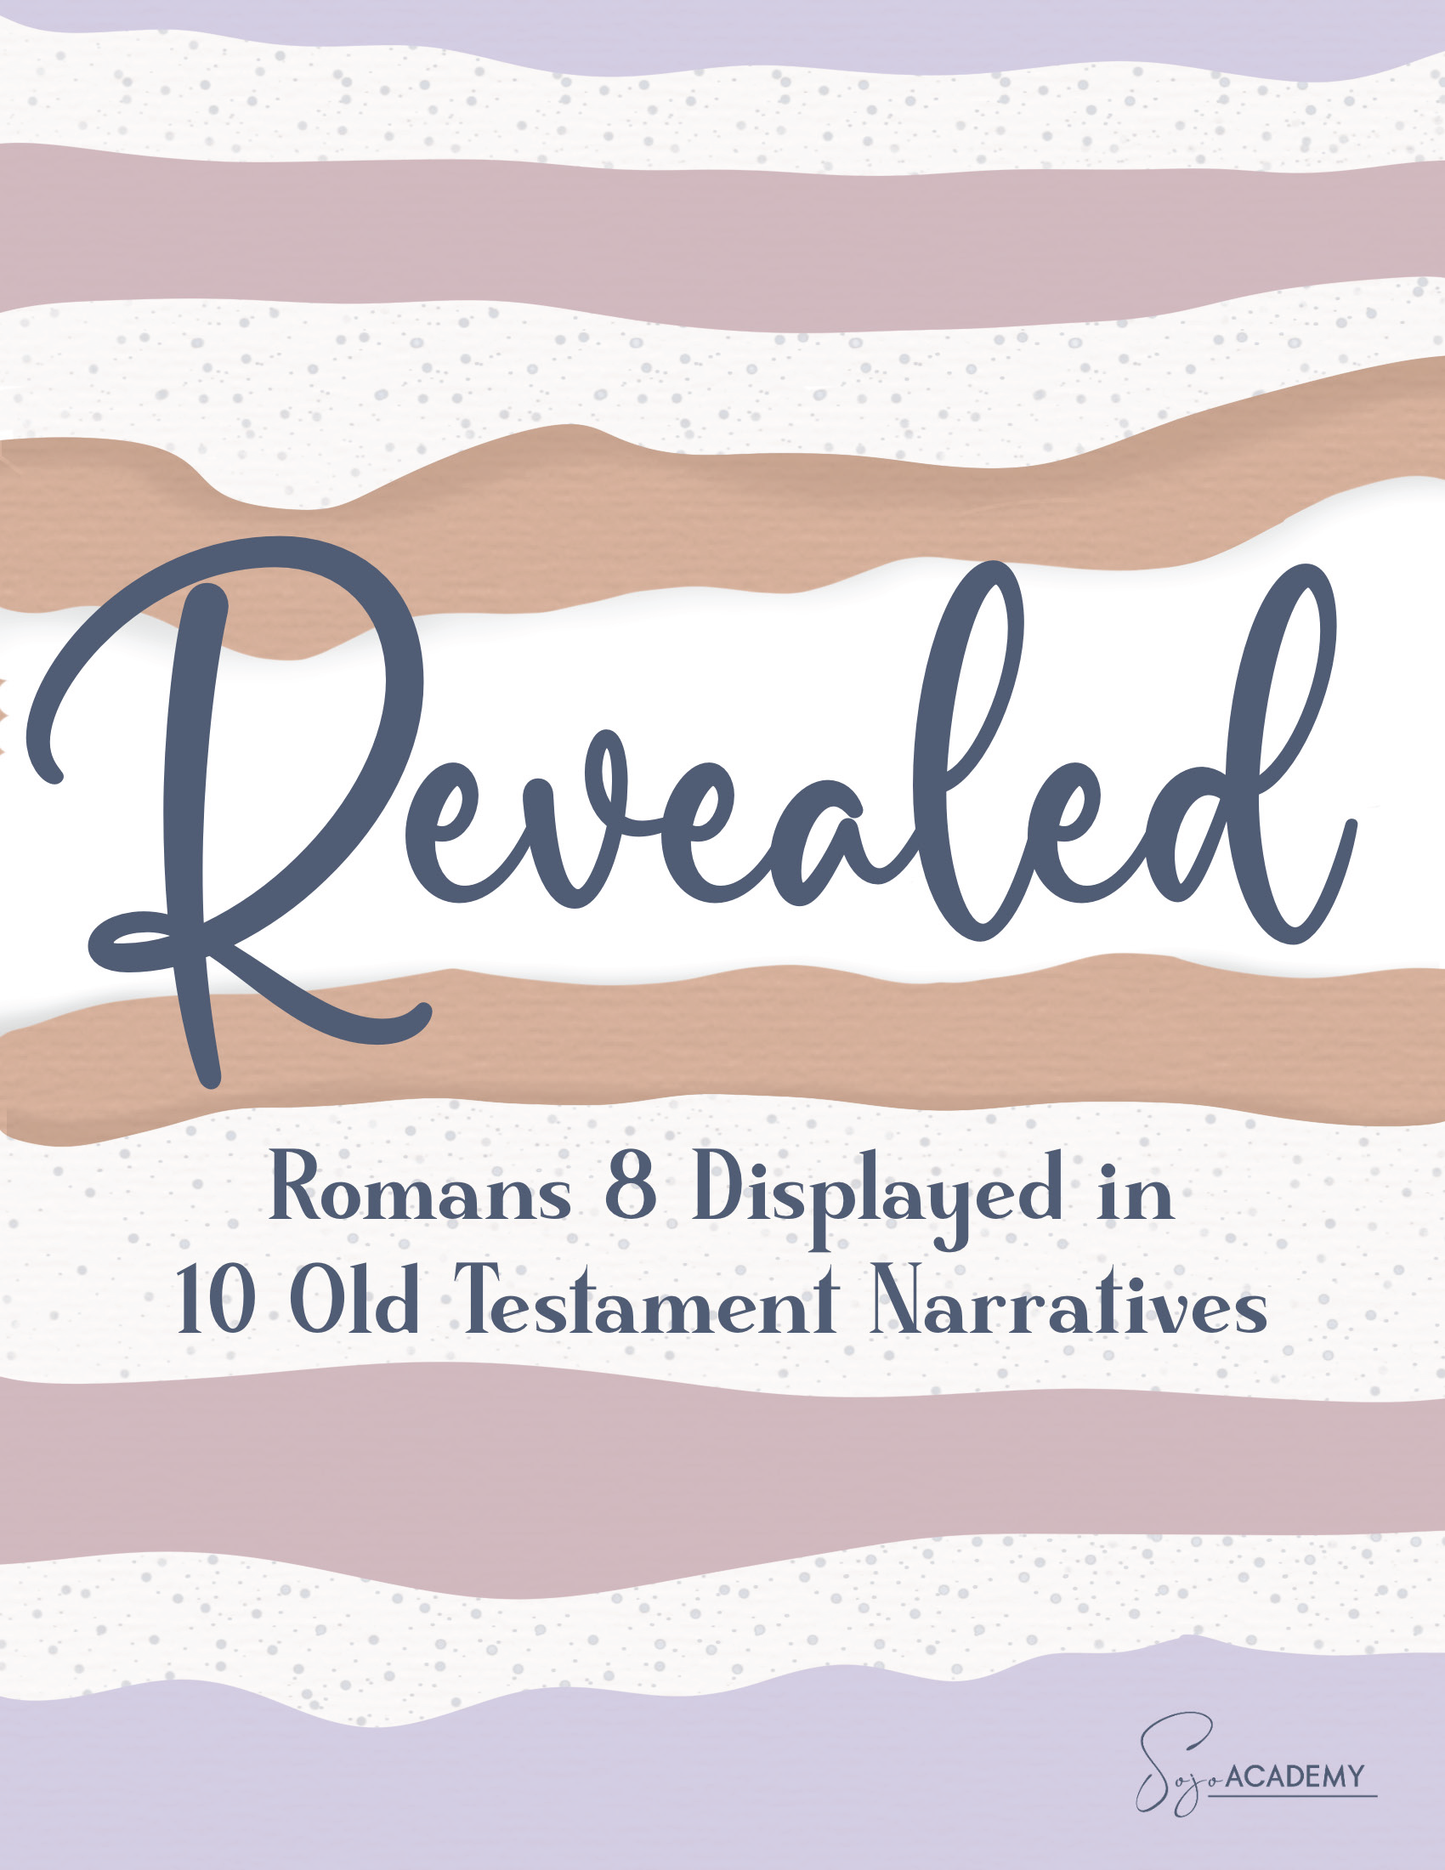 Revealed: Romans 8 Displayed in 10 Old Testament Narrative